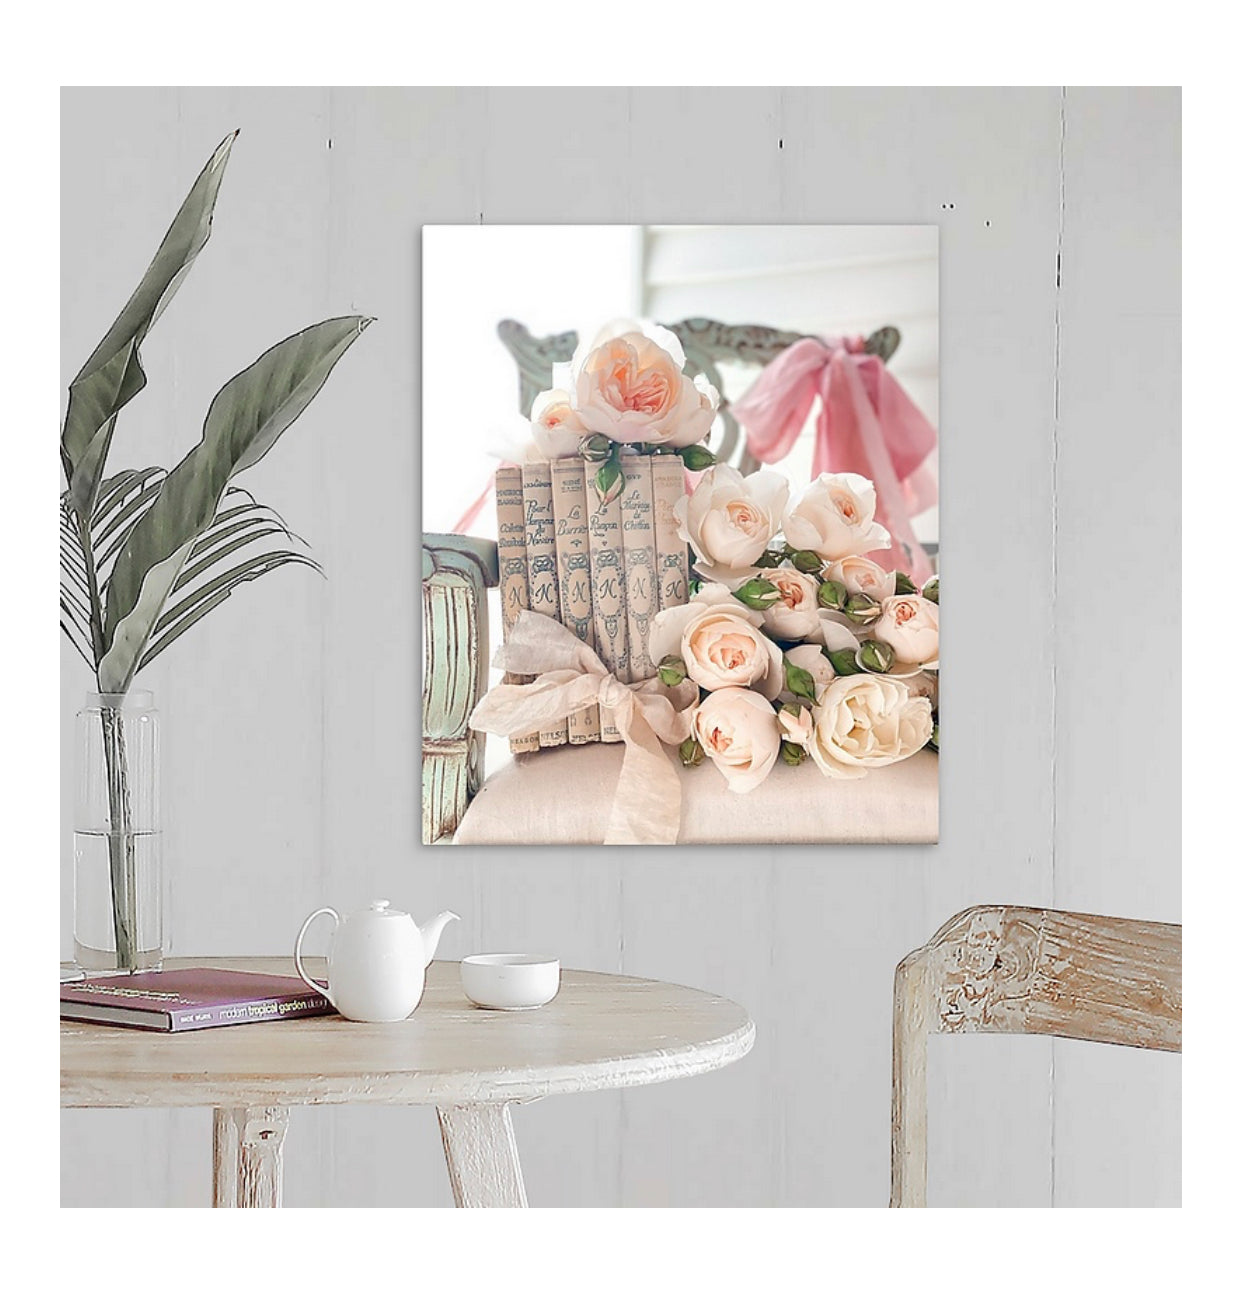 Cream French Books and Roses Gallery Wrapped Canvas